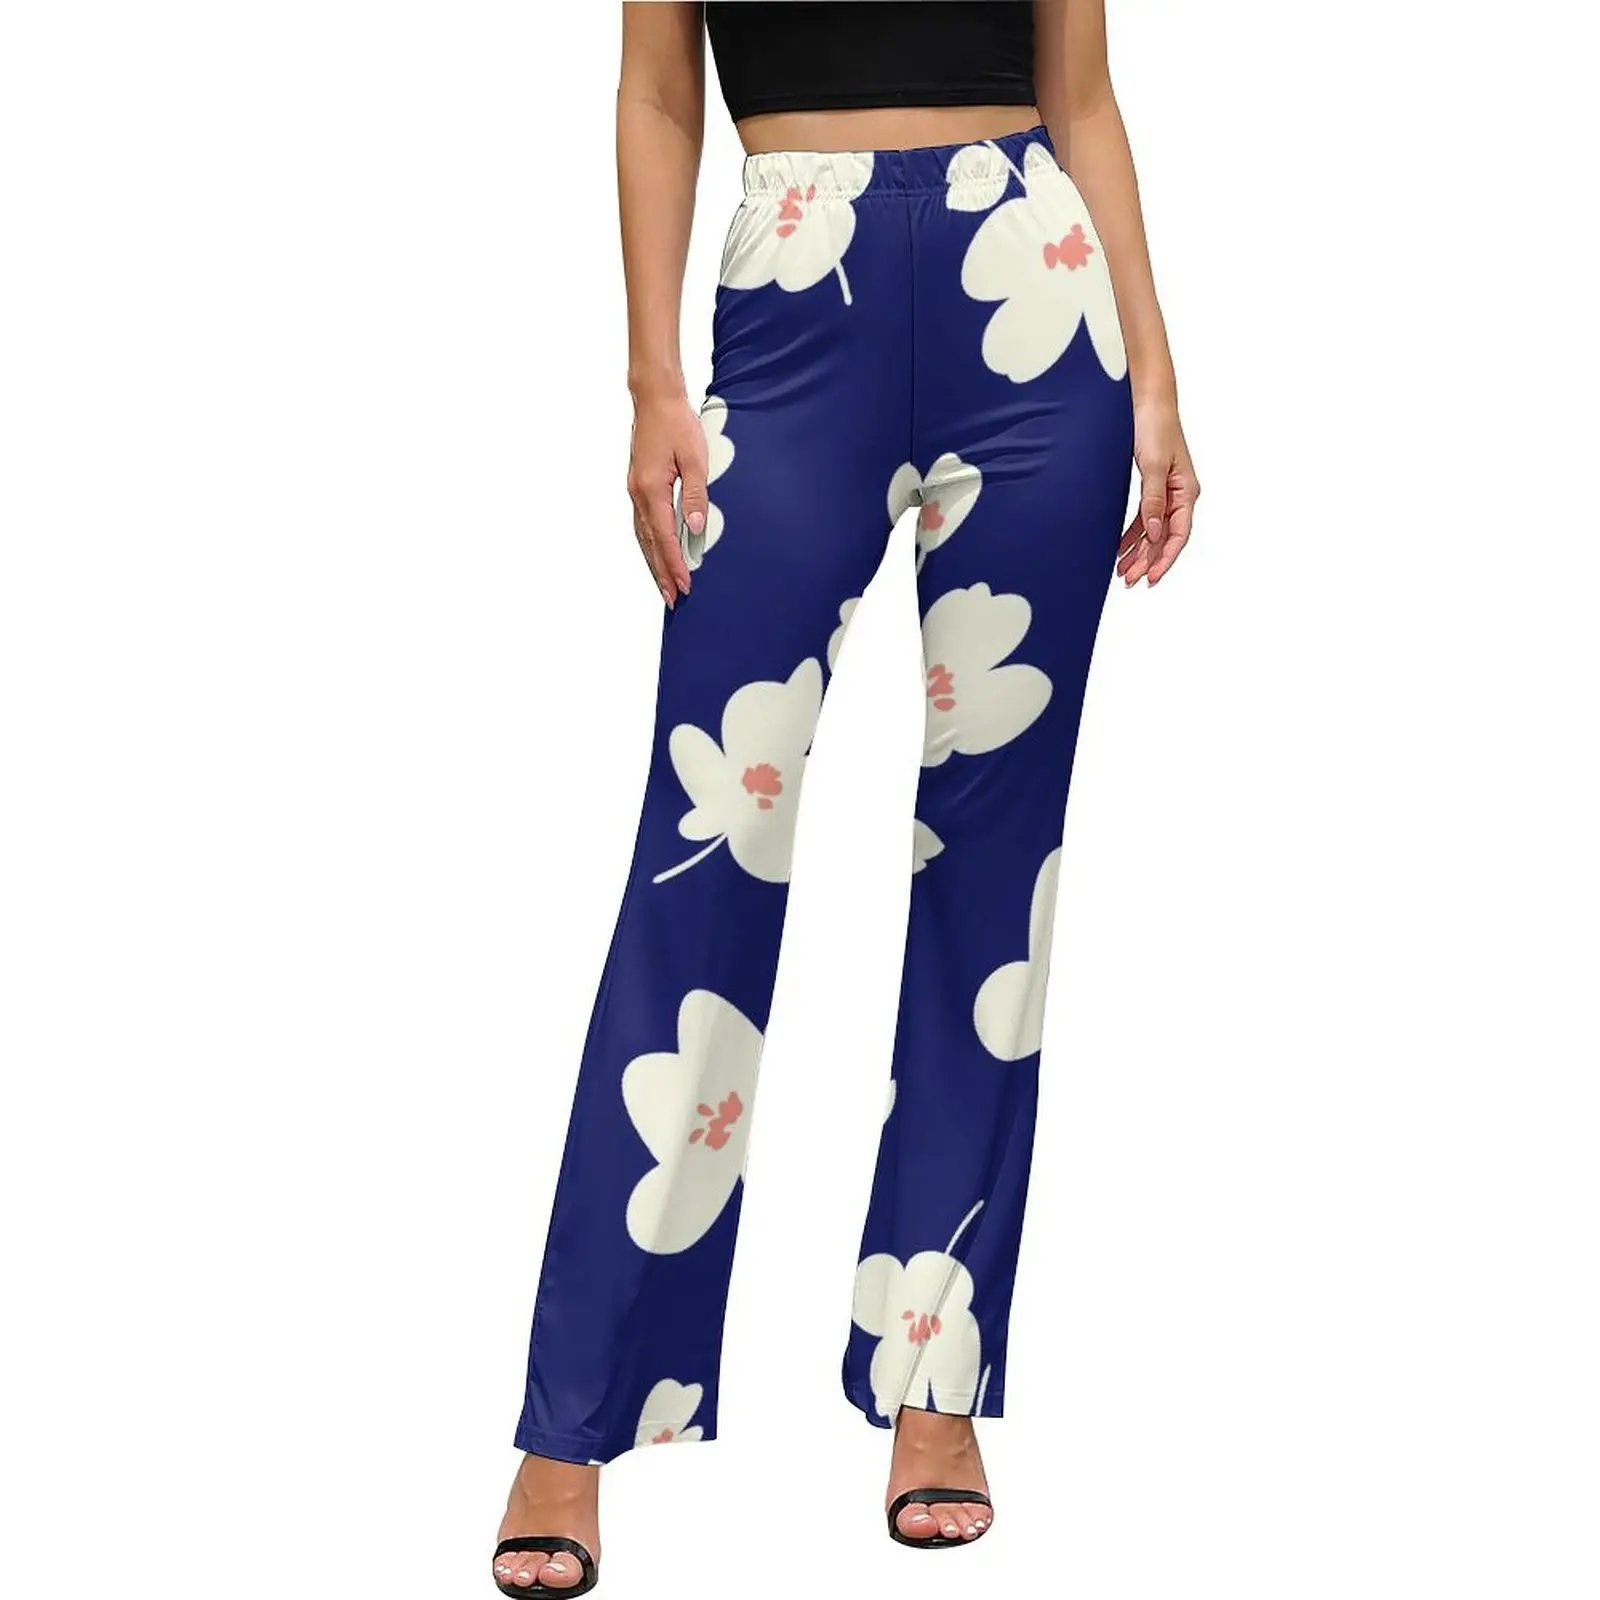 

White Daisies Print Pants Abstract Flower High Waist Casual Flared Trousers Summer Design Streetwear Pants Birthday Present